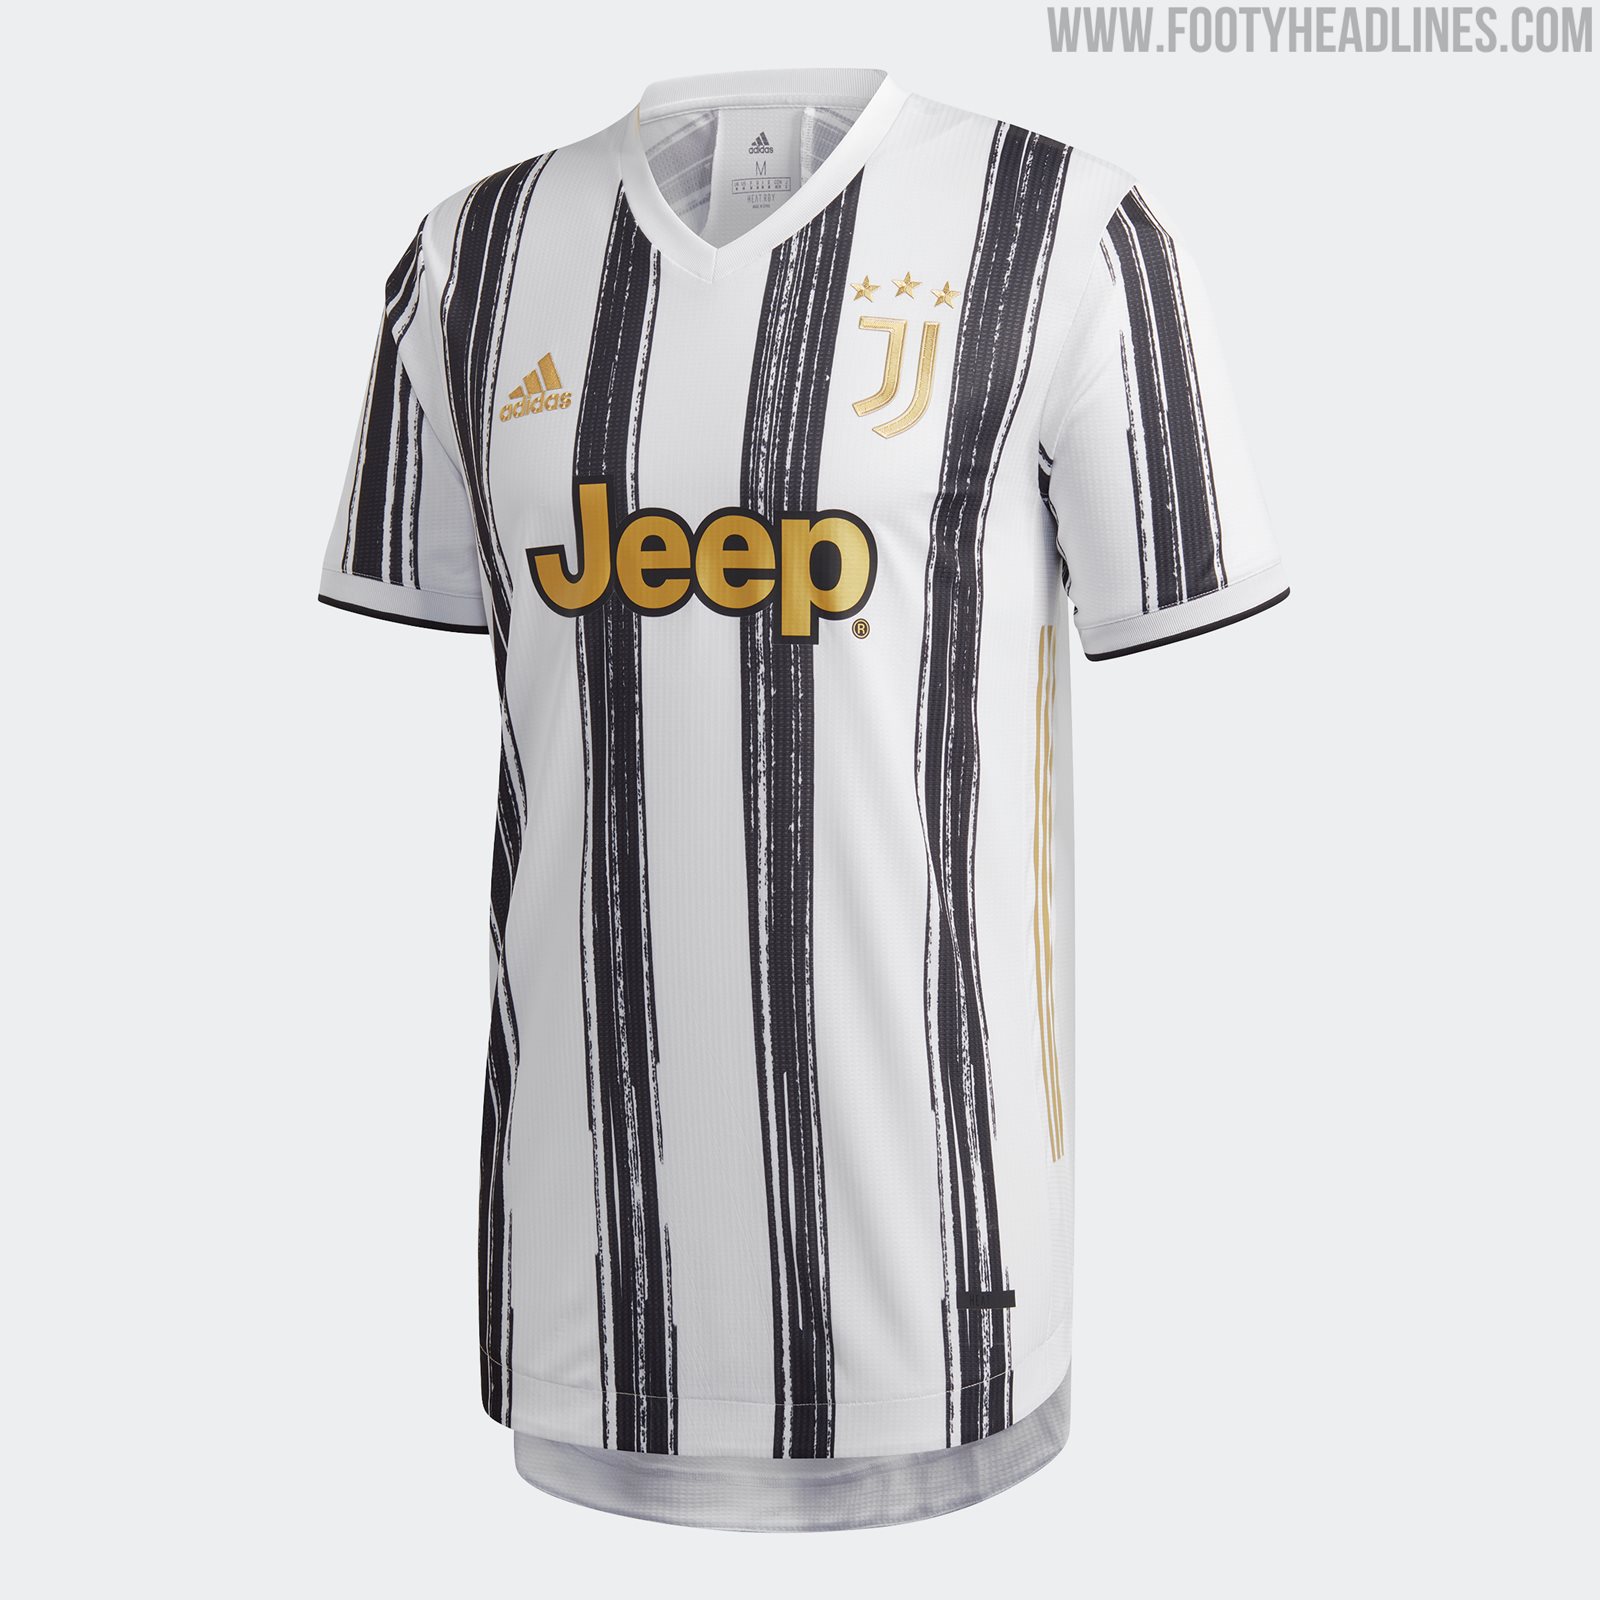 European soccer's best (and worst) jerseys this season, reviewed ...